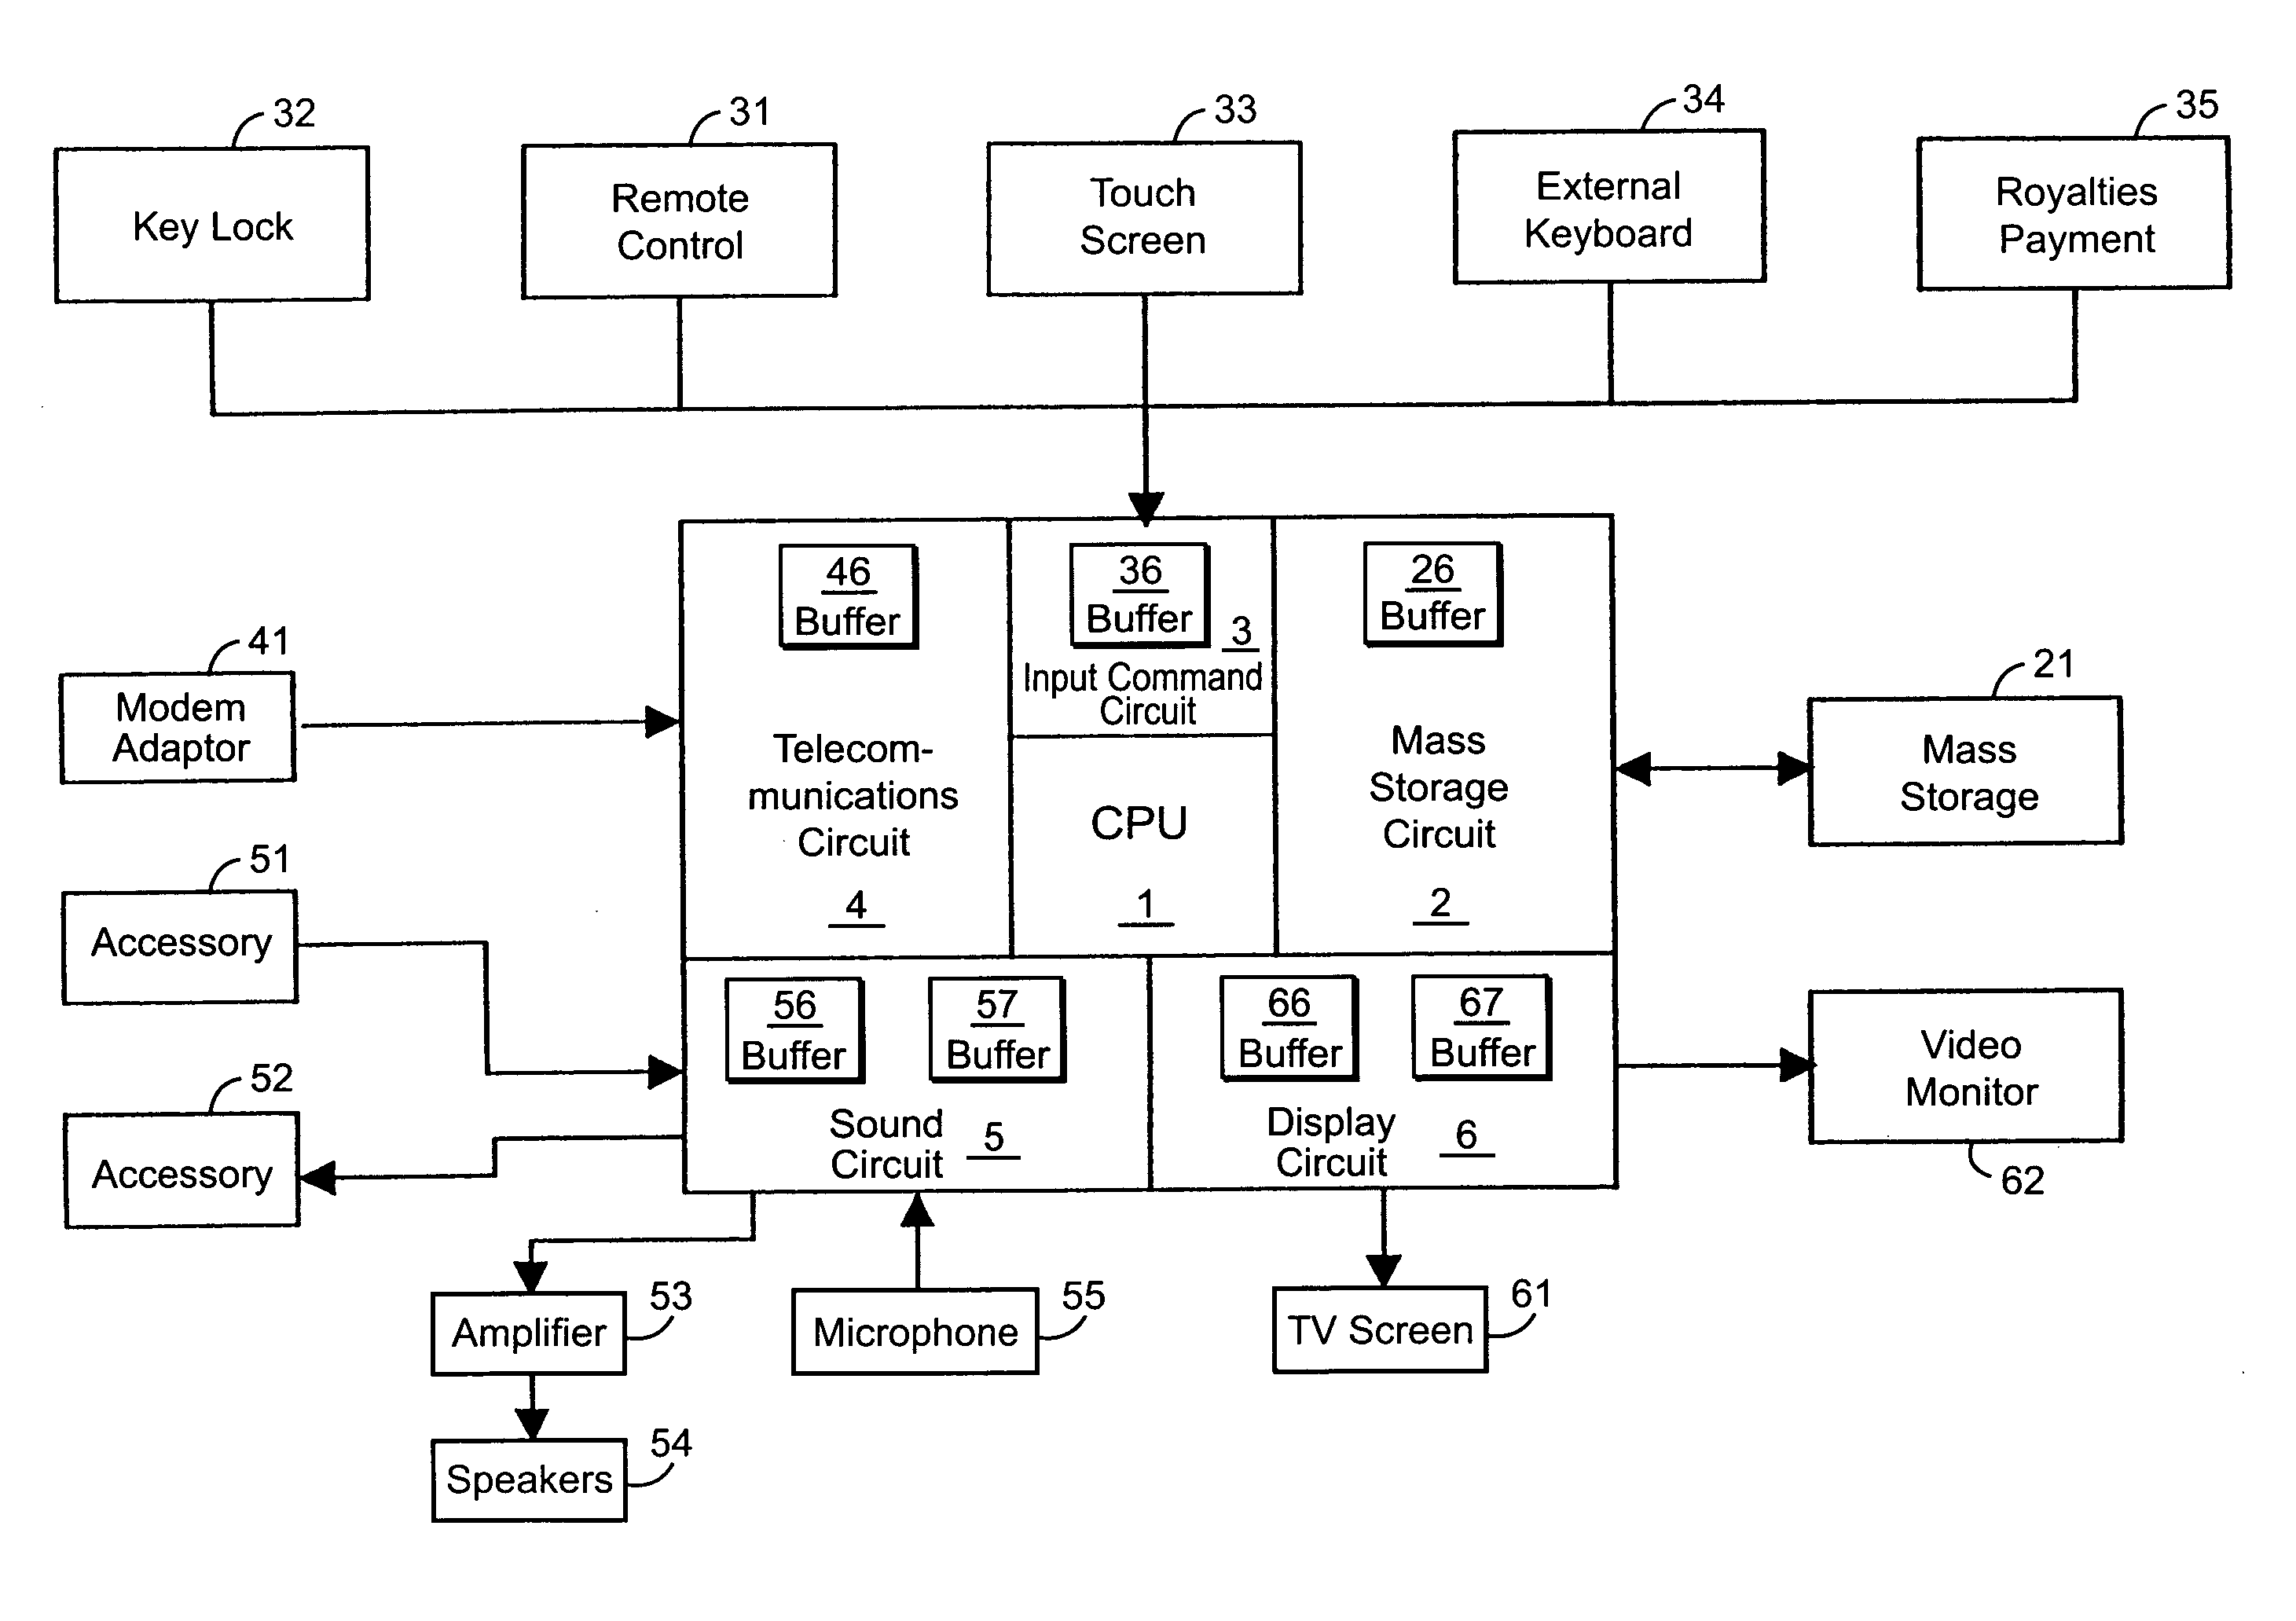 System for remote loading of objects or files in order to update software